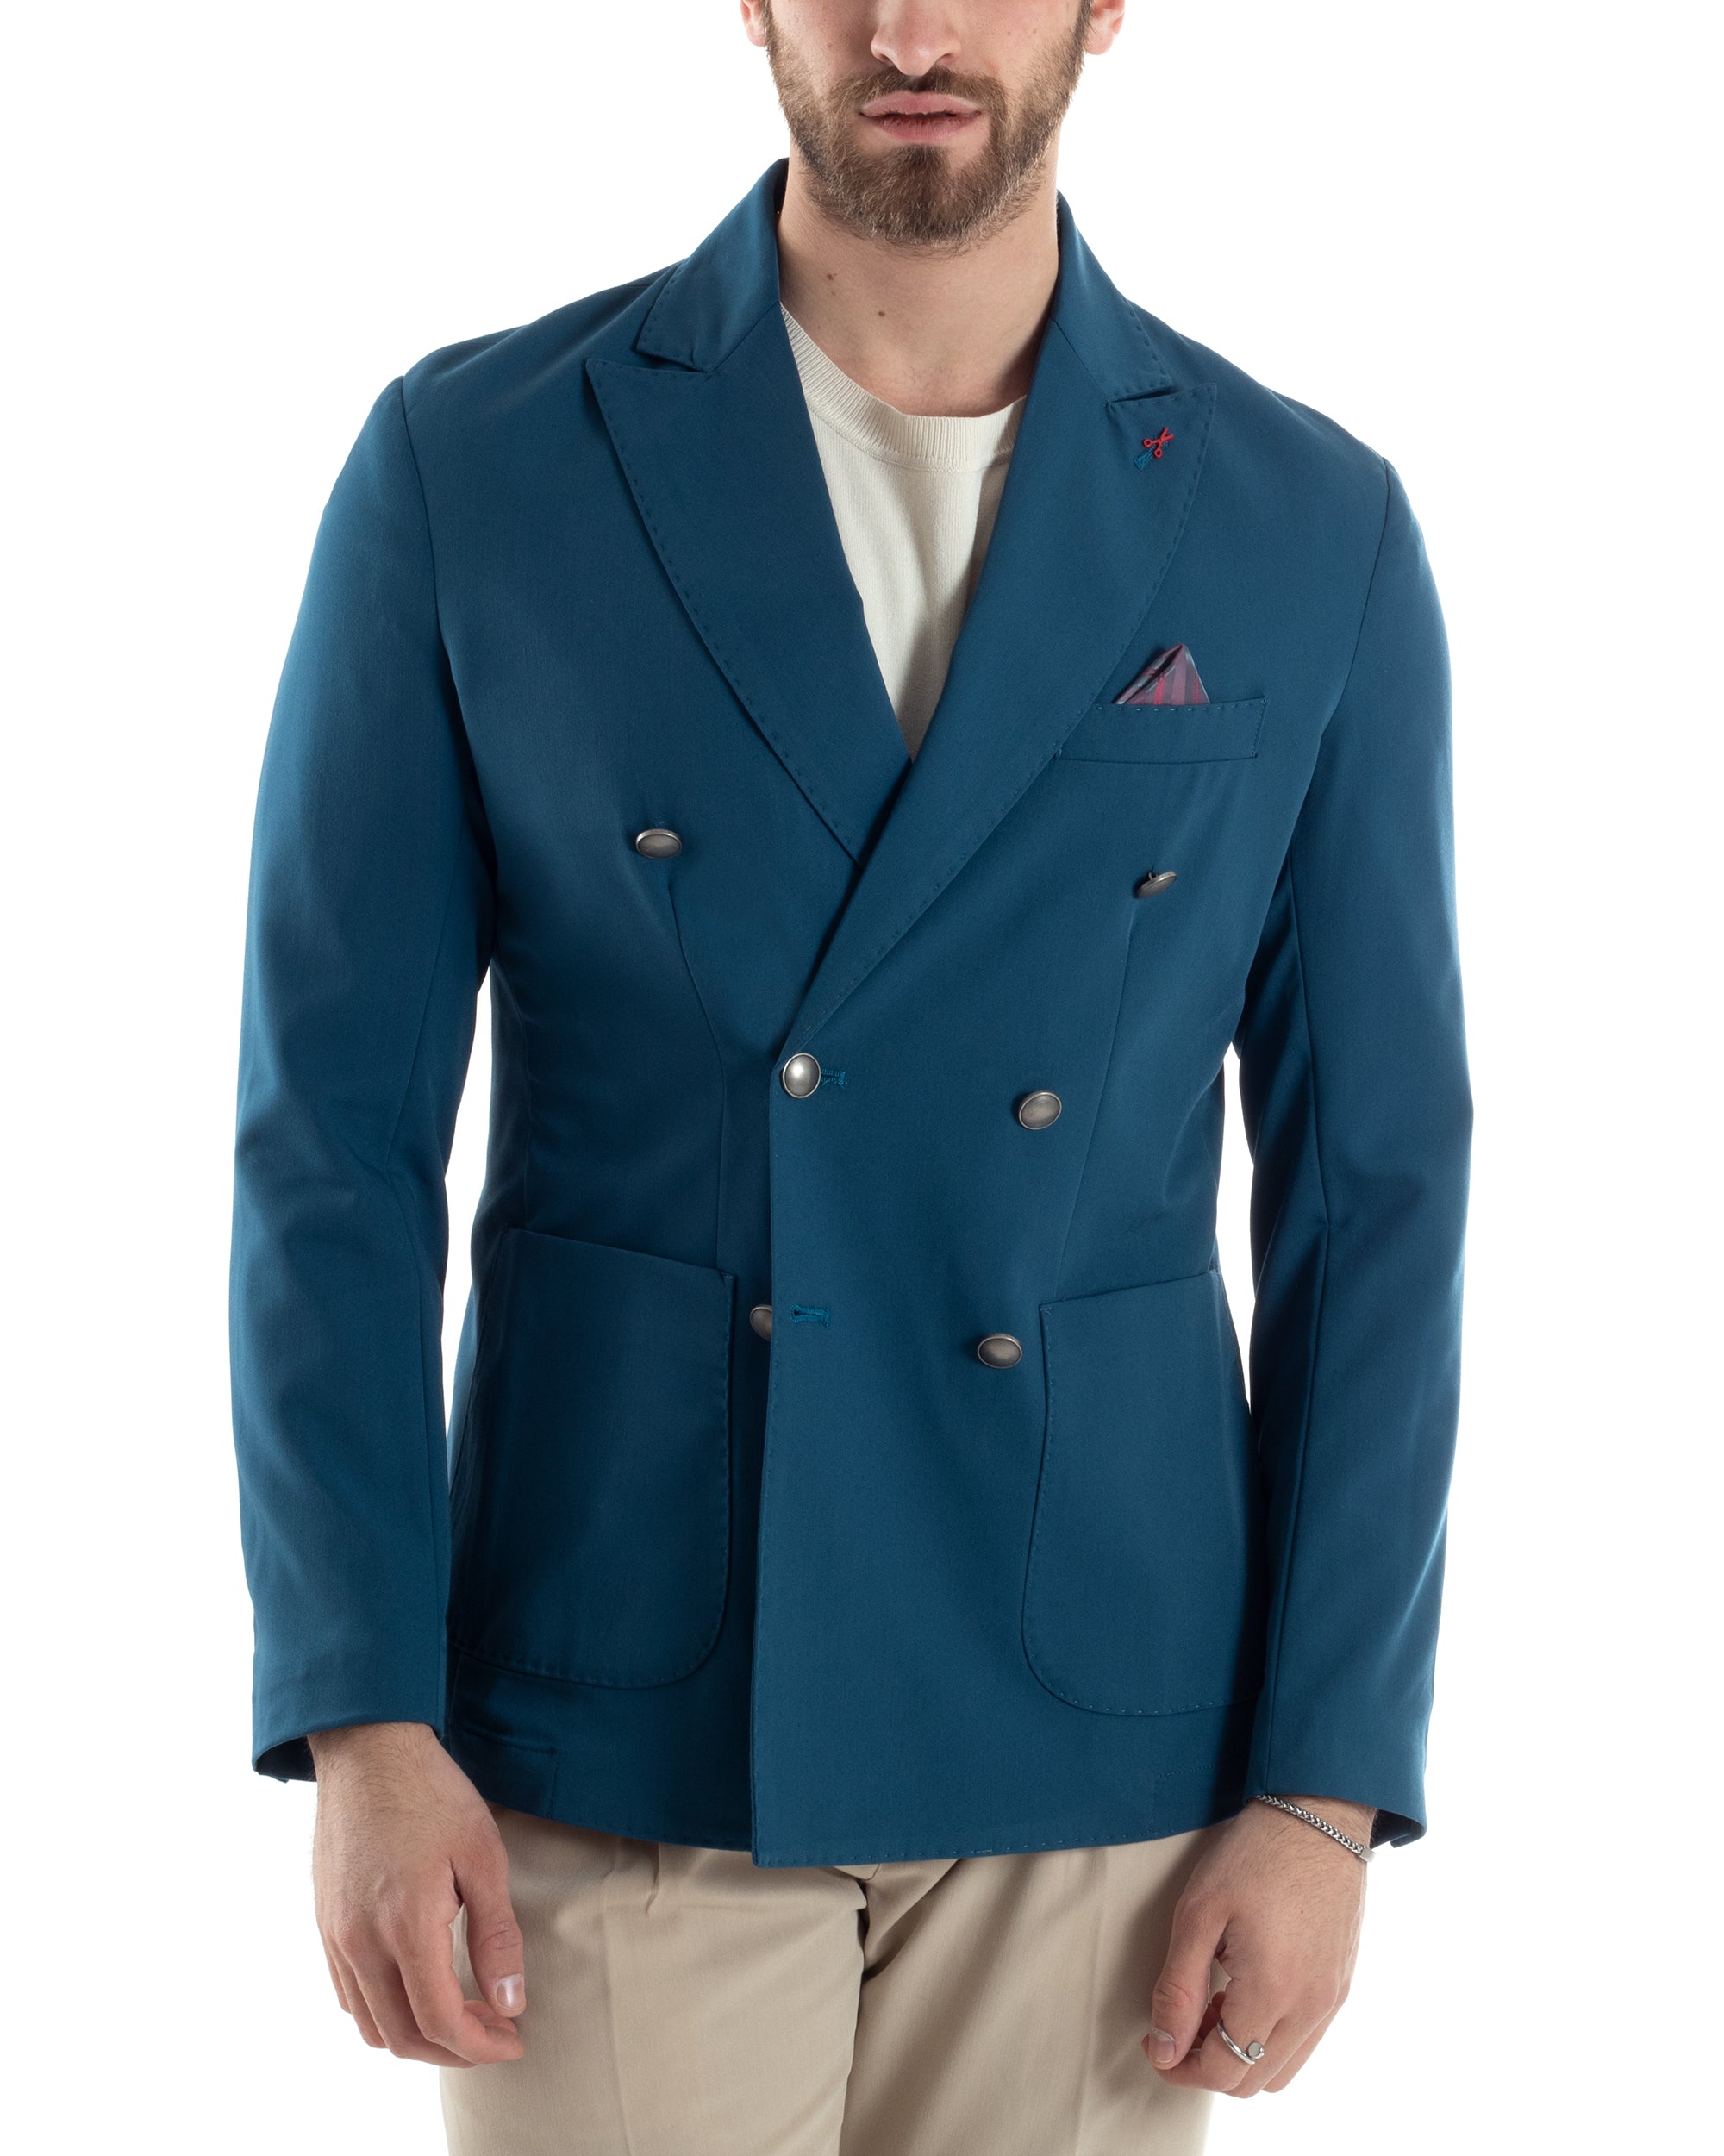 Men's Double-Breasted Linen Jacket Solid Color Blue Tailored Ceremony Elegant Casual GIOSAL-G3062A